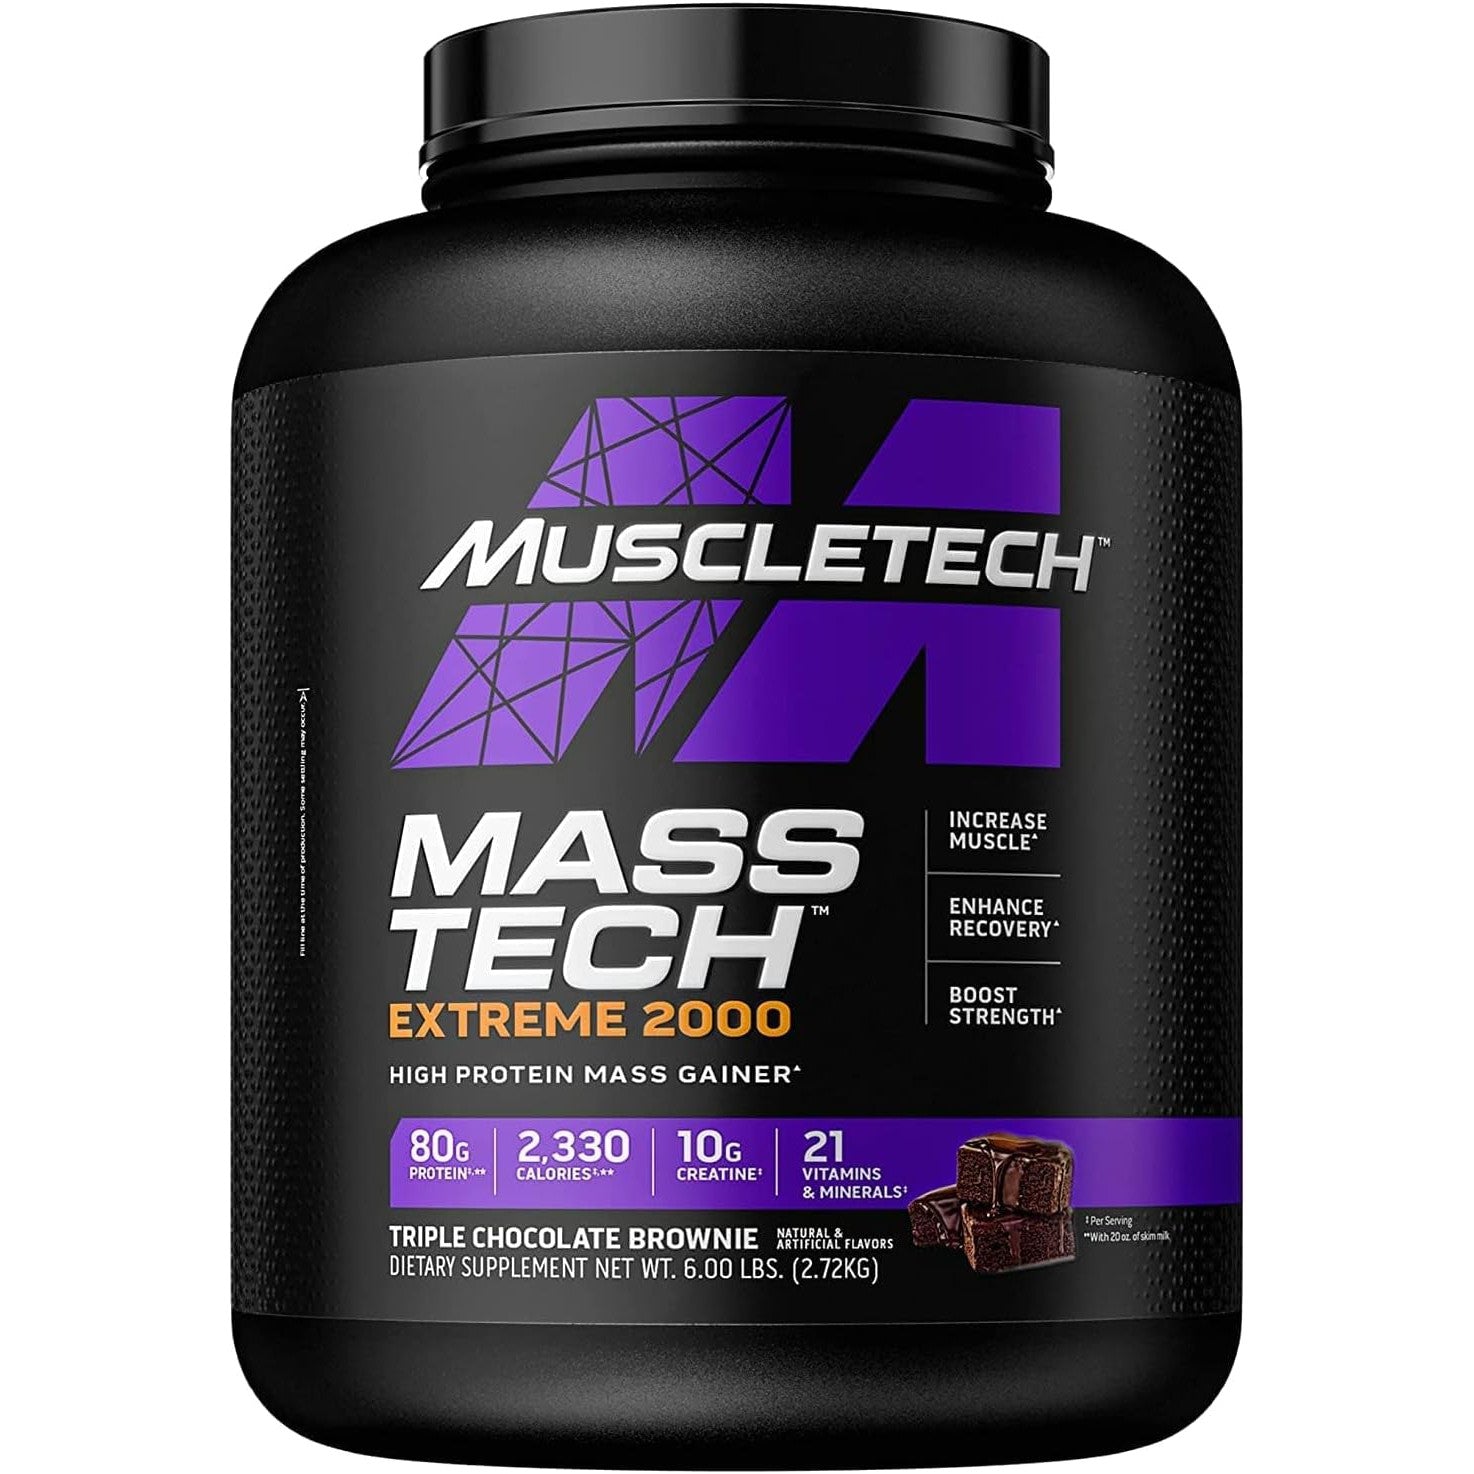 MuscleTech Mass Gainer Mass-Tech Extreme 2000, Muscle Builder Whey Protein Powder, 80g Protein + 10g Creatine + Carbs 2.72 KG